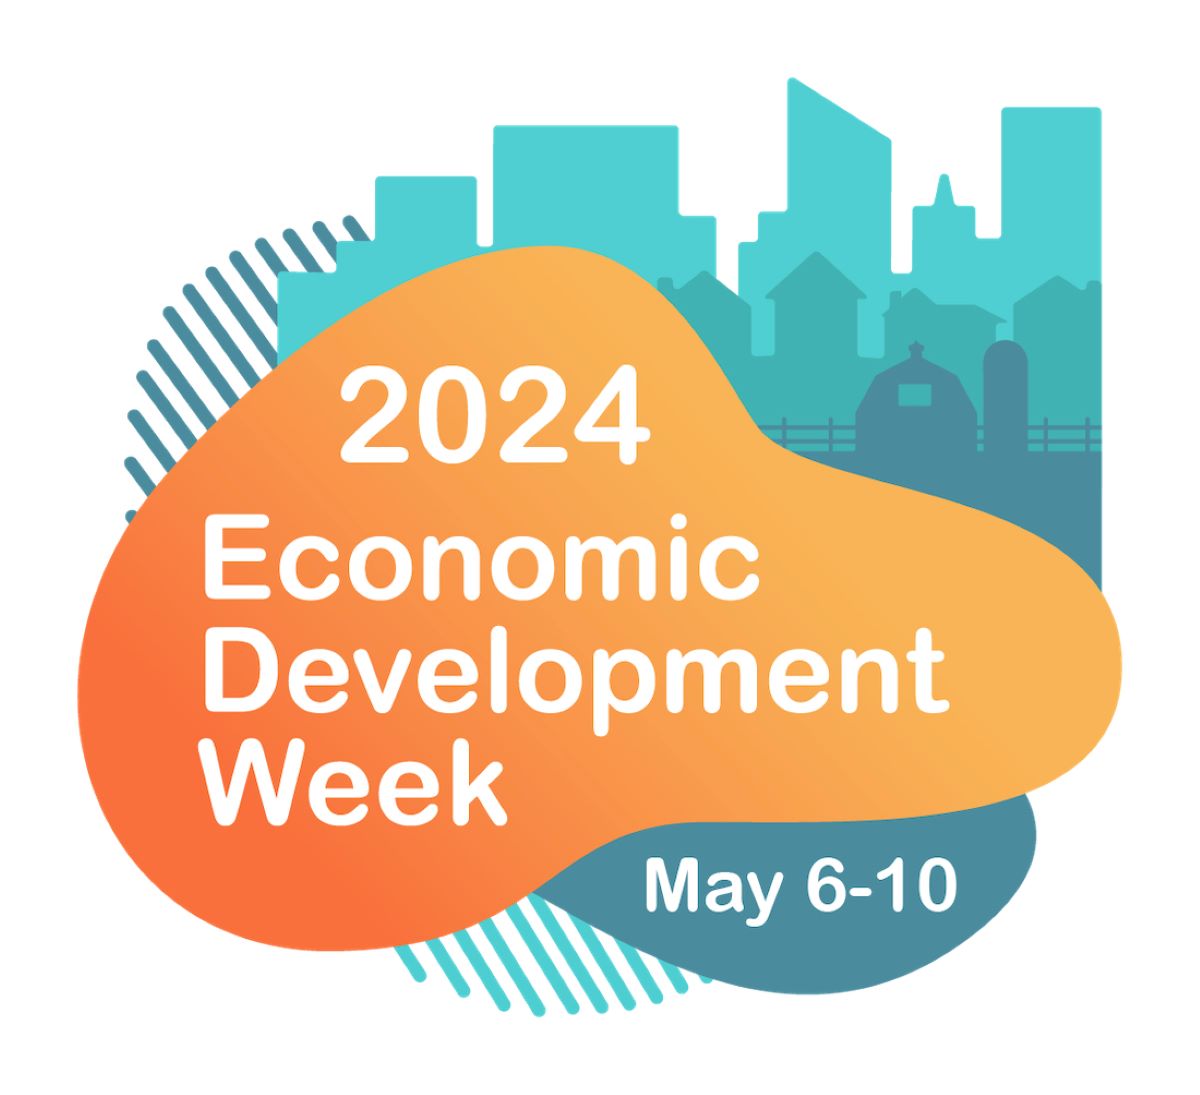 Click the PCDC Turns Economic Development Week Into a Month With Three Major Events slide photo to open